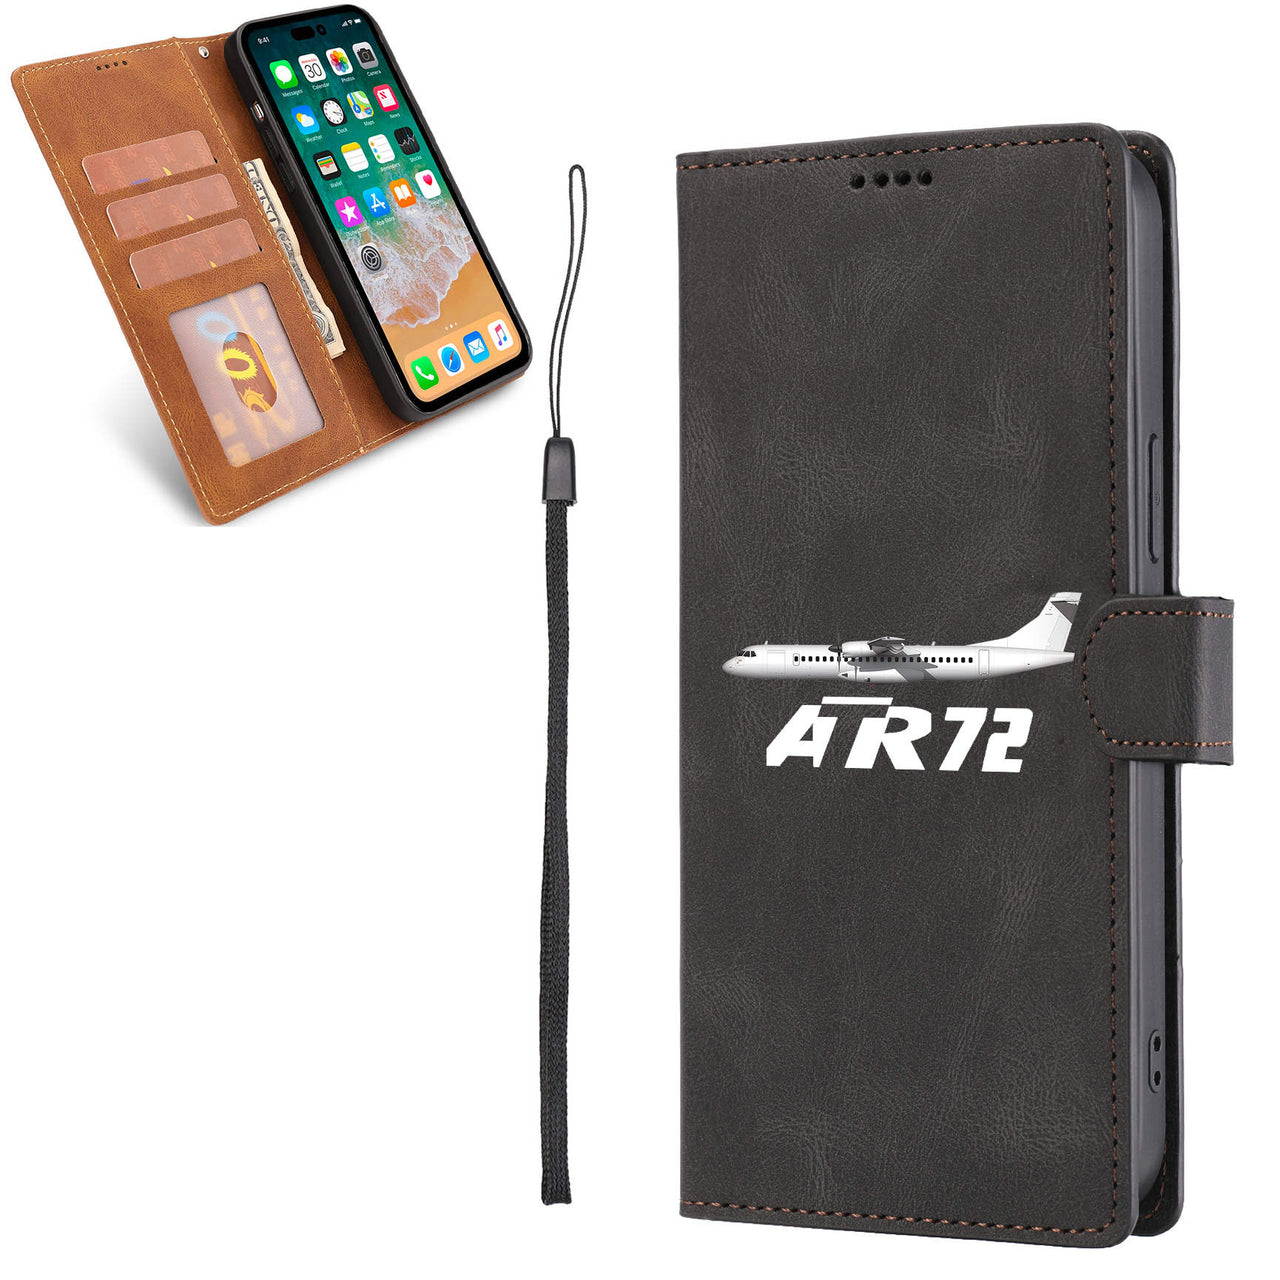 The ATR72 Designed Leather iPhone Cases